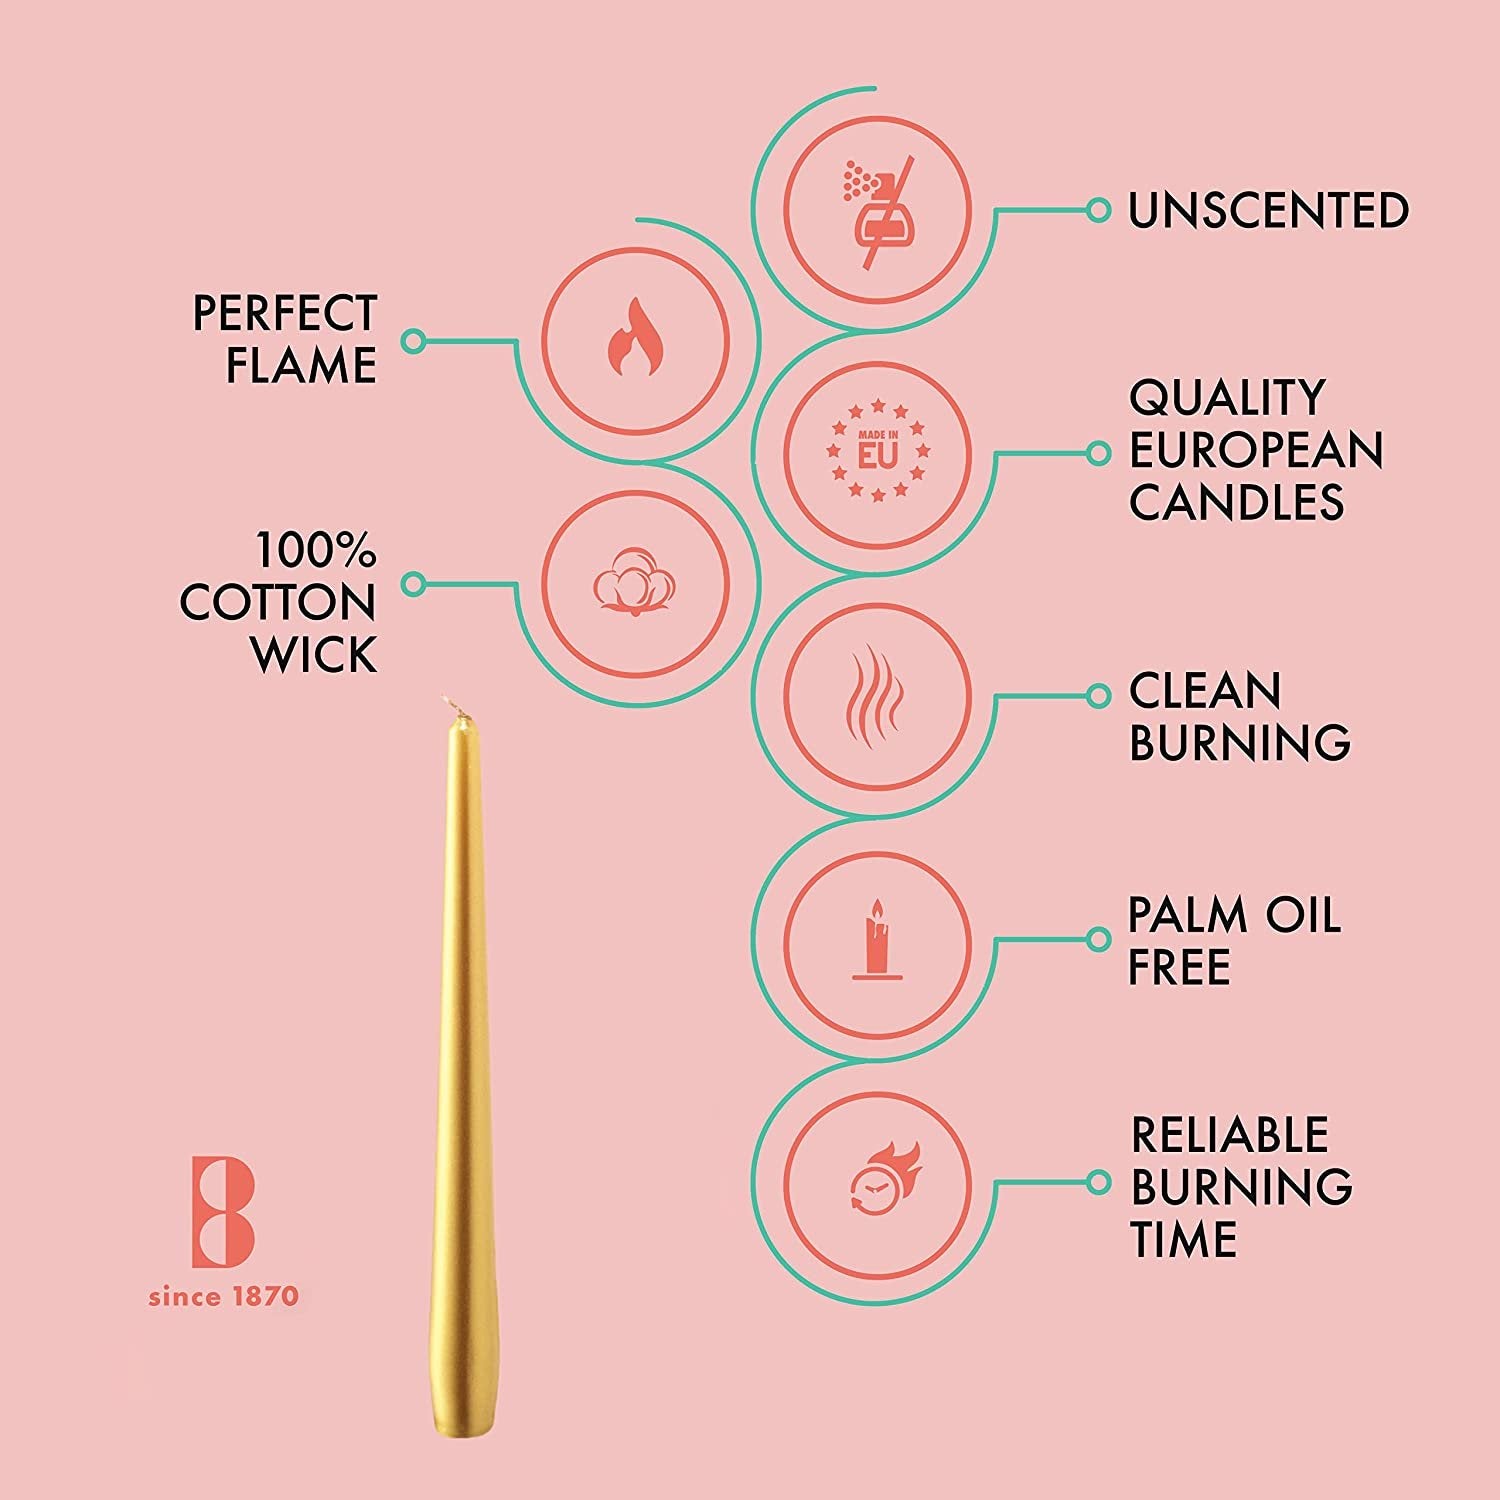 BOLSIUS Metallic Gold Taper Candles - 12 Pack Individually Wrapped 10 Inch Dinner Candle Set - 8 Burn Hours - Premium European Quality - Unscented Smokeless & Dripless Household Party Candlesticks